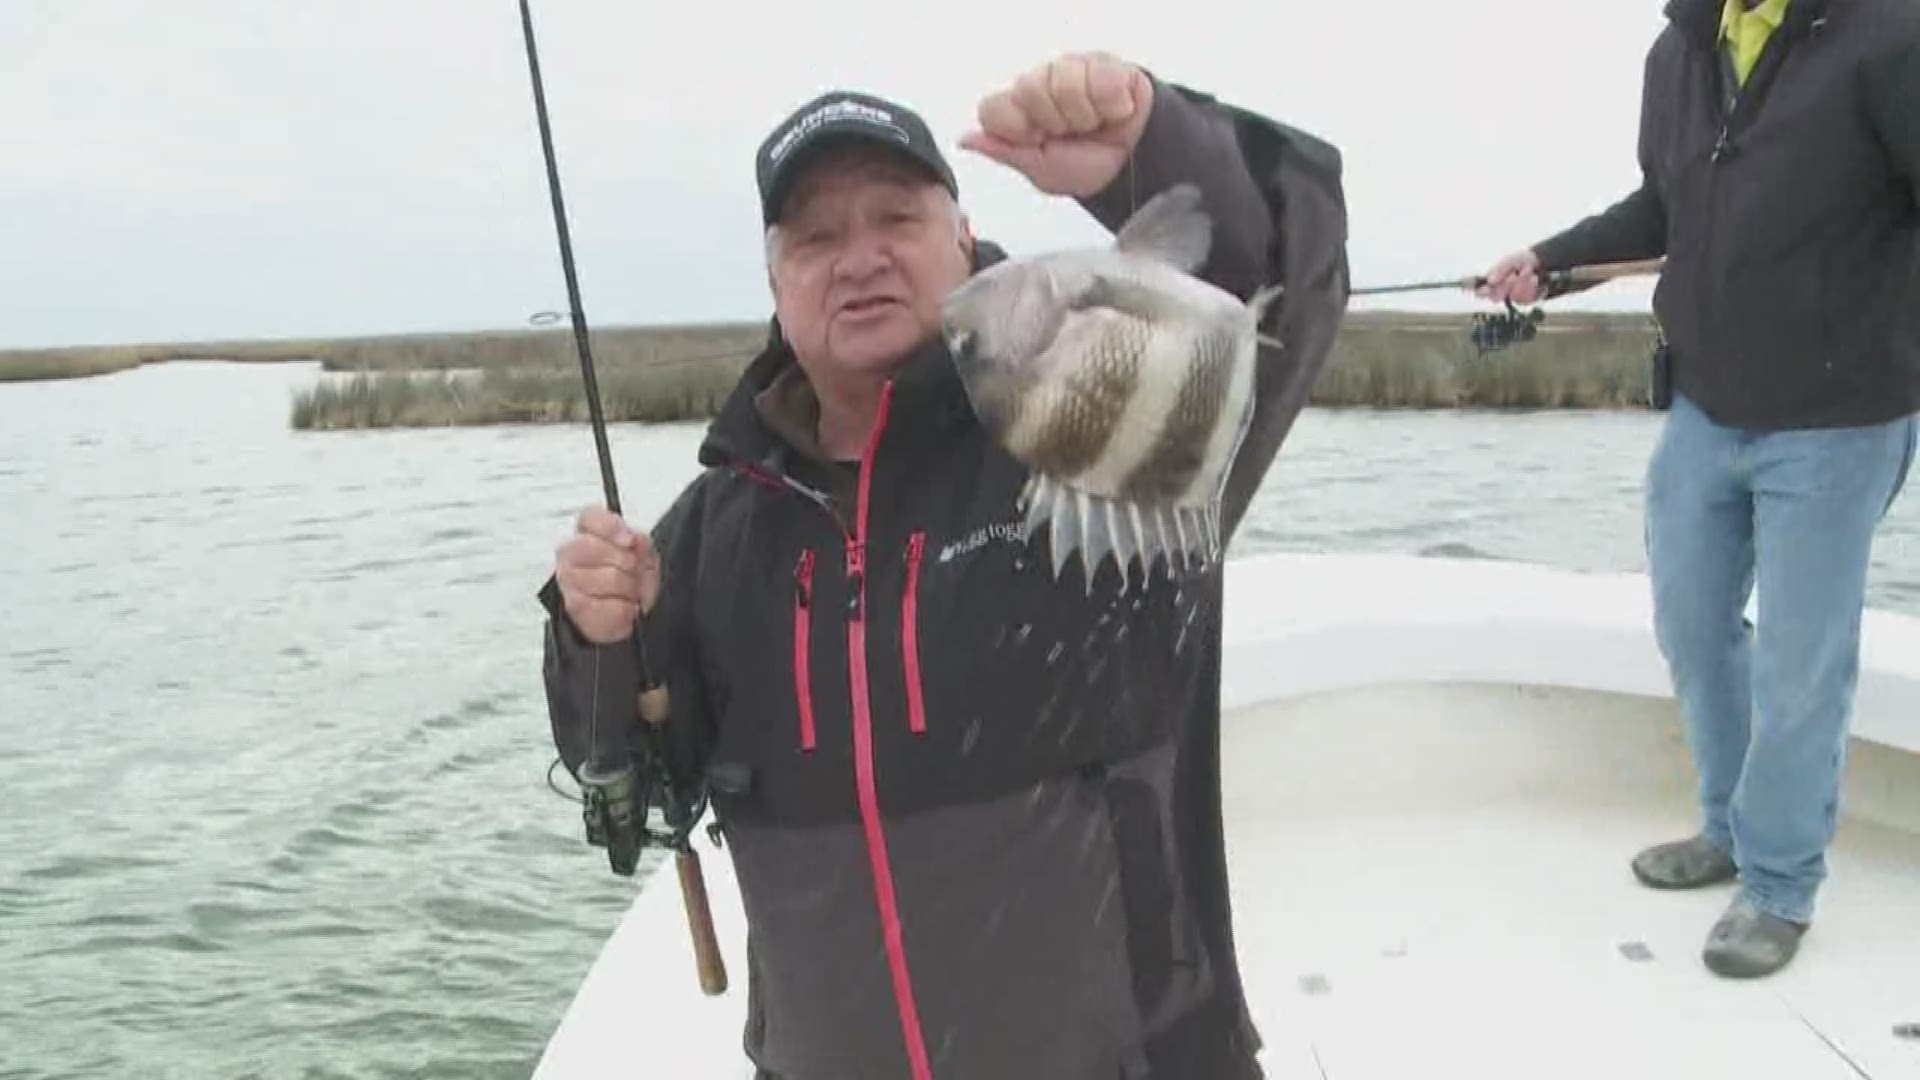 Don Dubuc has tips on making the best of a tough weather situation, in the Fish and Game Report.